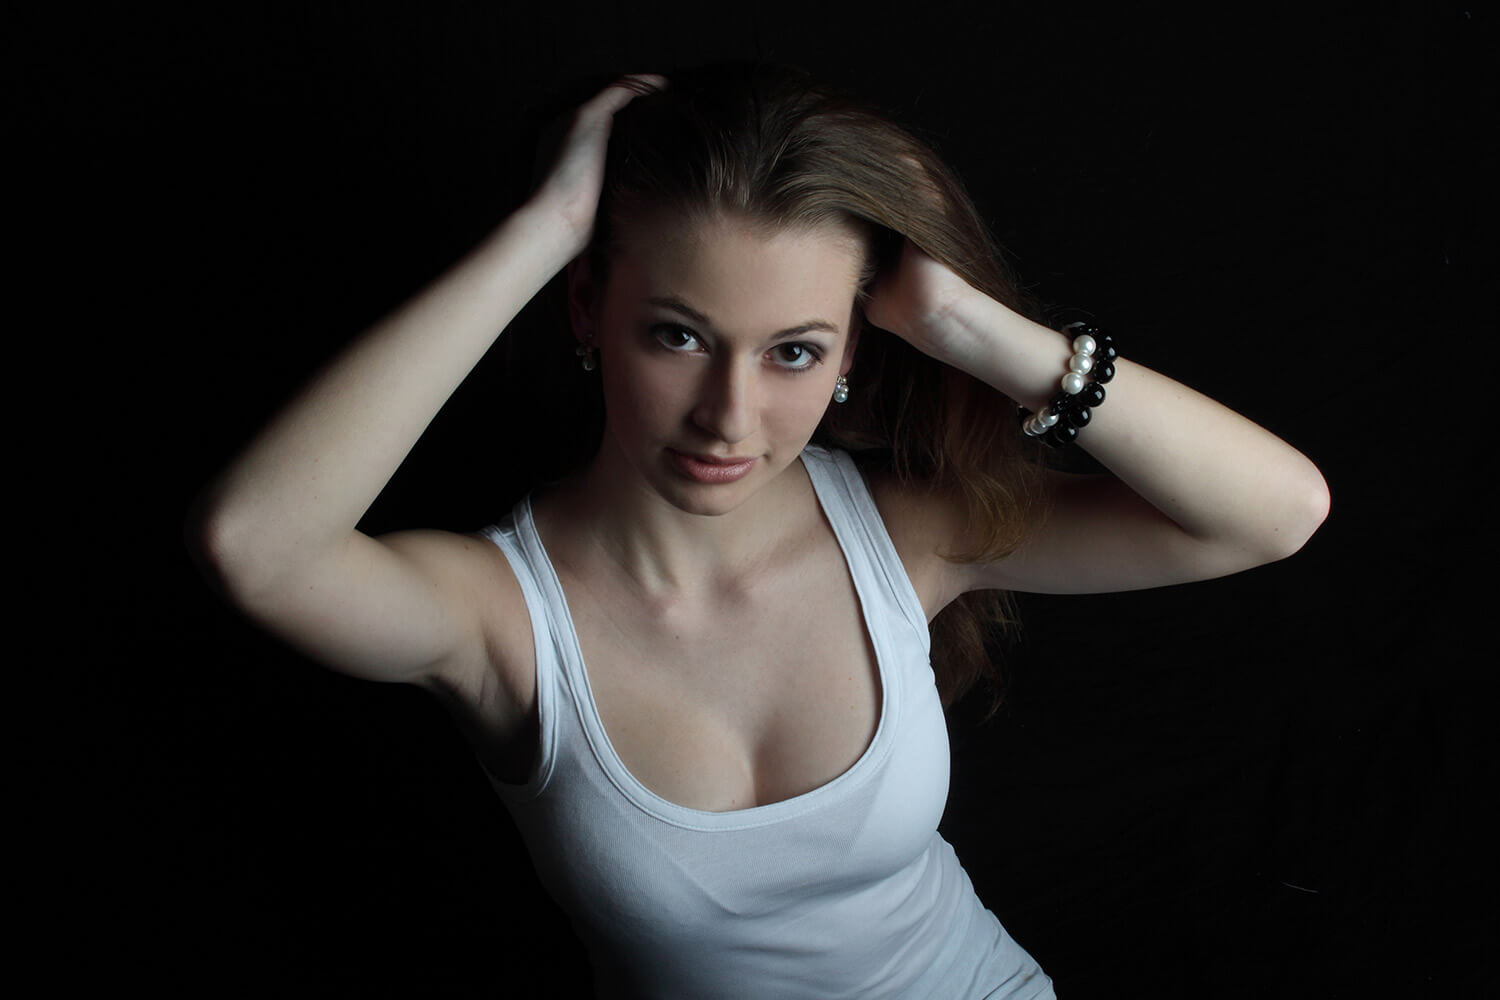 female portrait in a white tank top and with her hands in her hair on a dark background